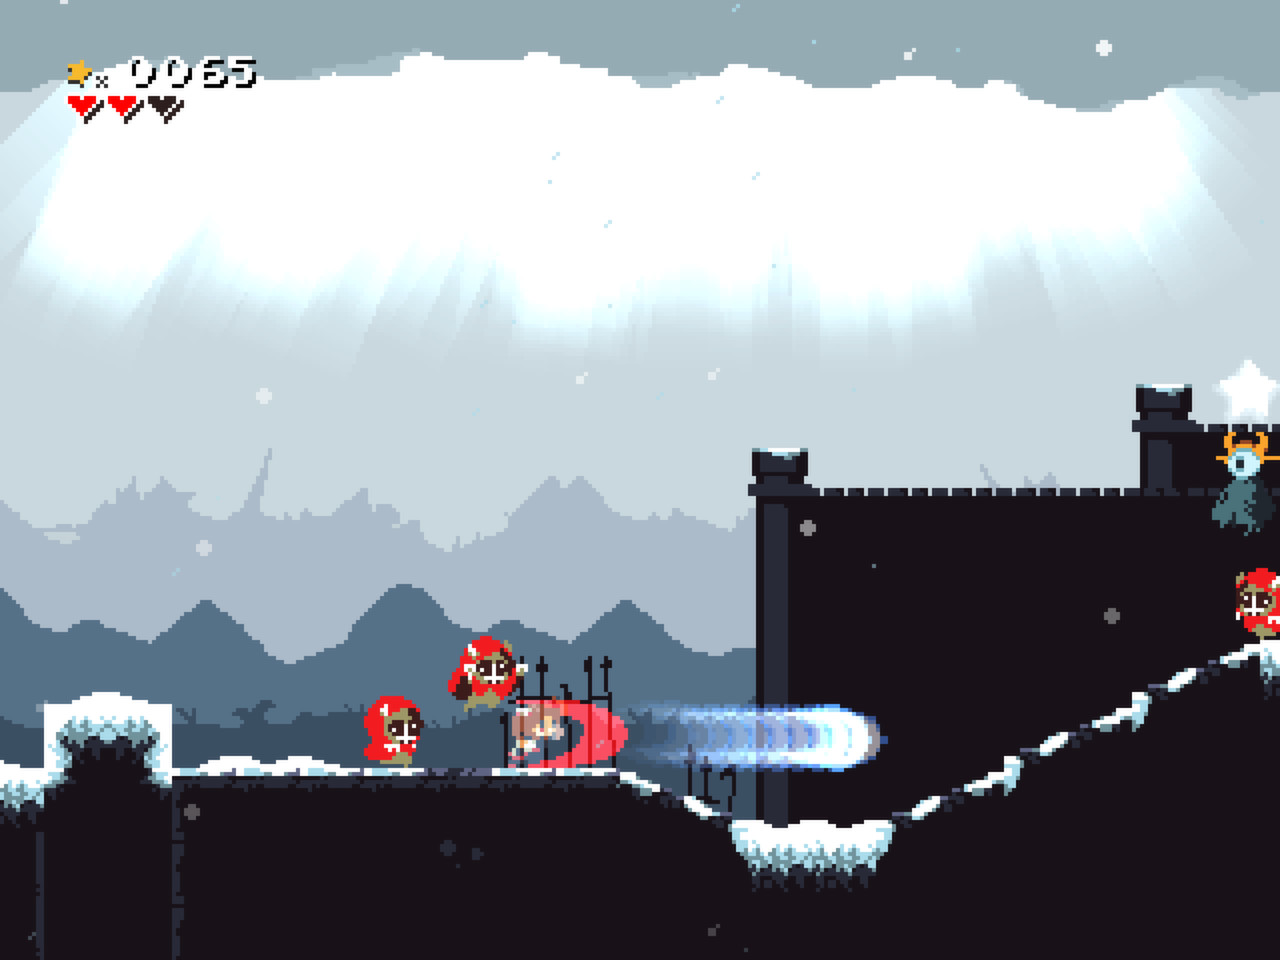 Momodora III Backgrounds, Compatible - PC, Mobile, Gadgets| 1280x960 px